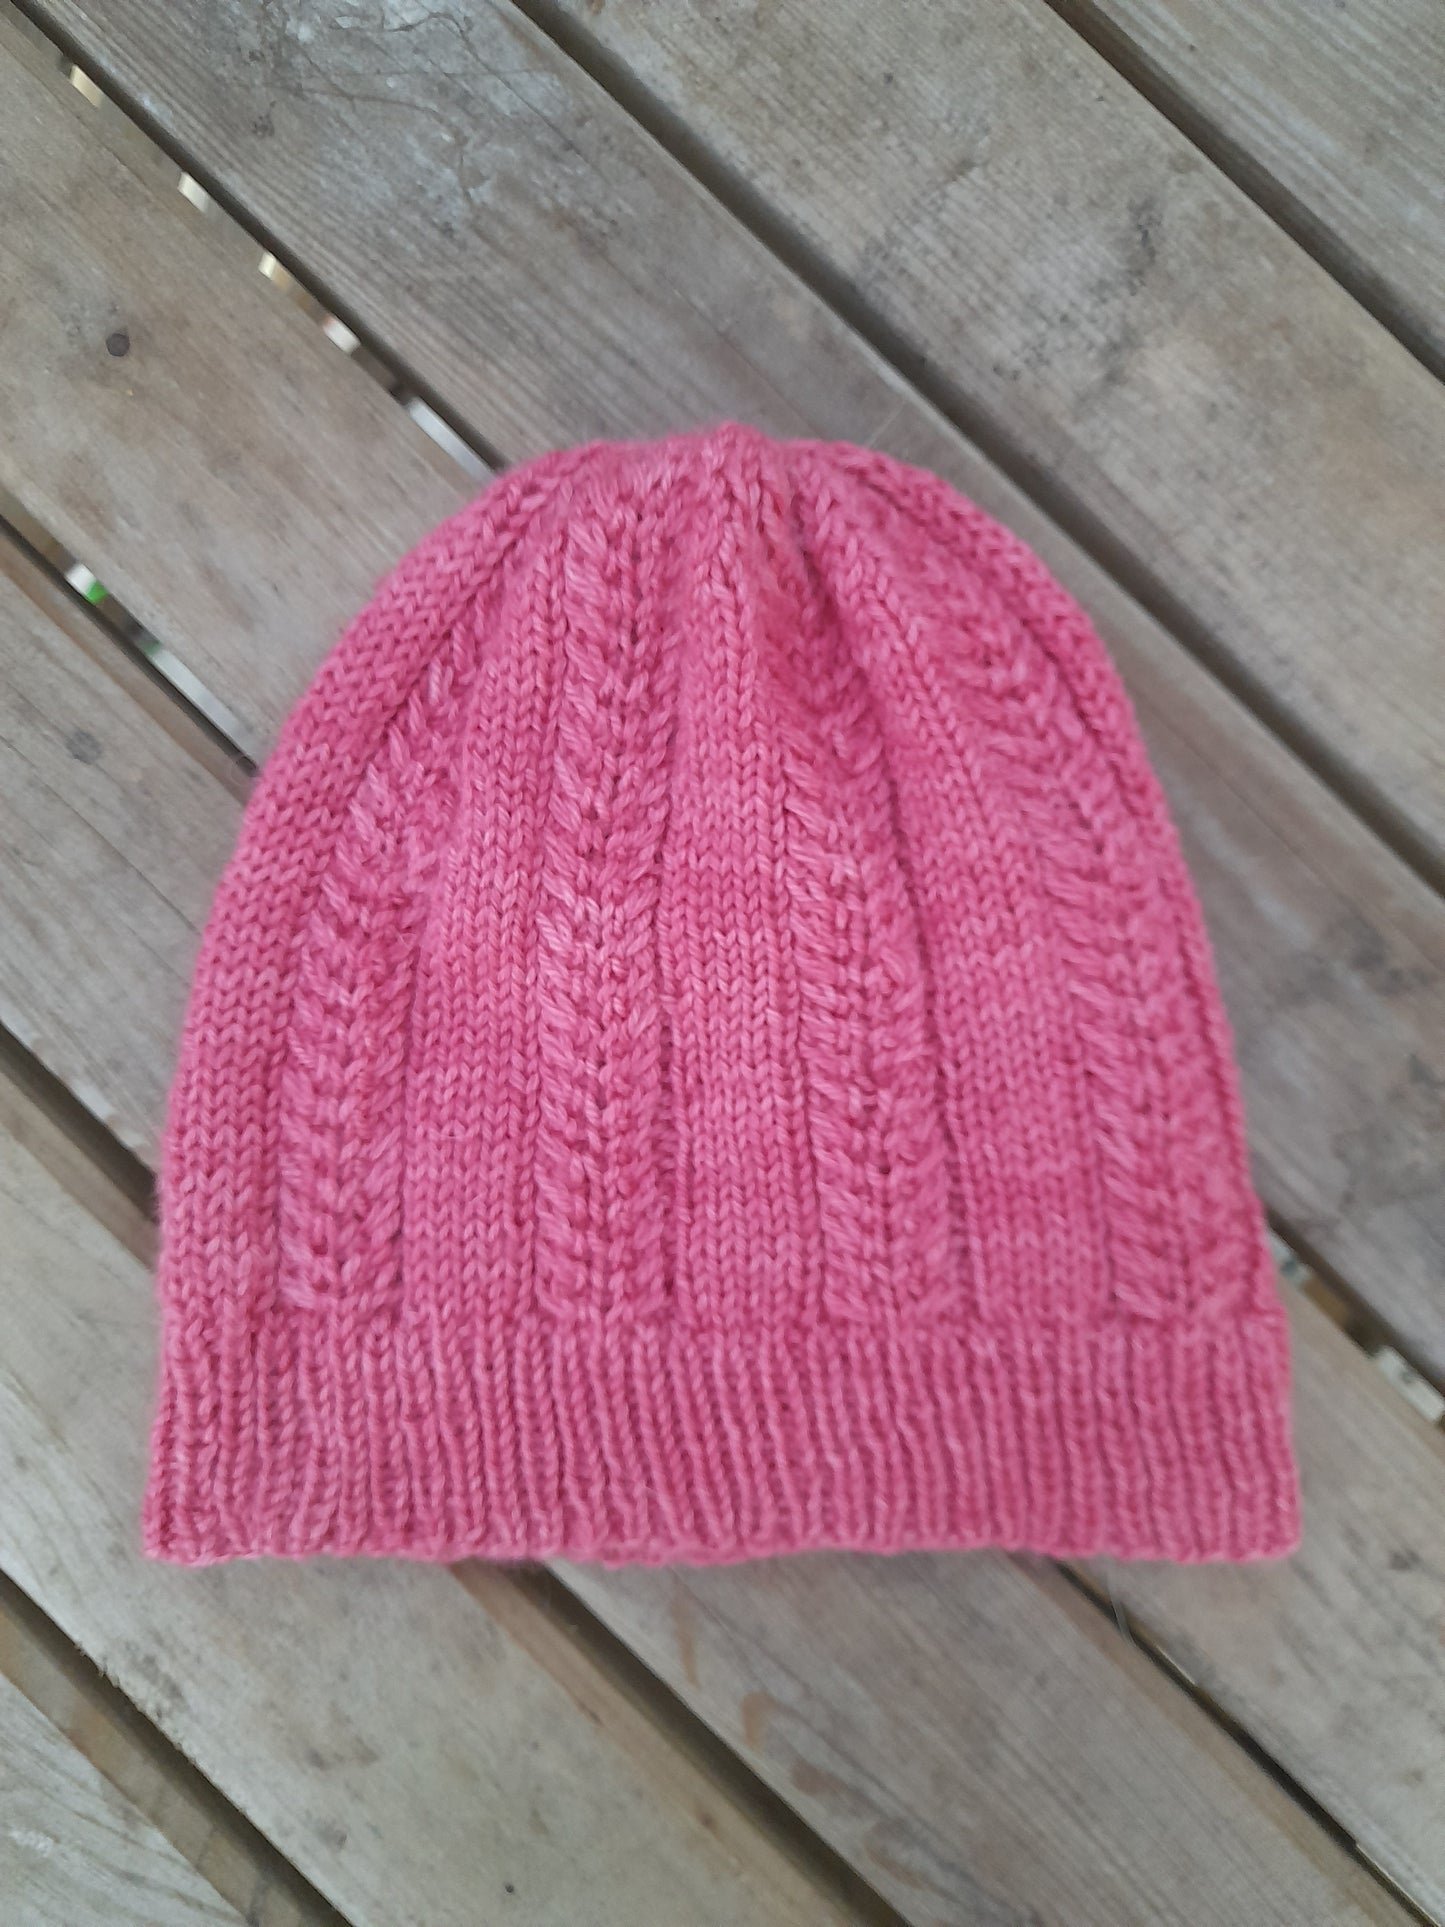 Really simple cable knit hat pattern pdf. Fishbone cable knit. Easy toque pattern for women. DK yarn hat patterns. 